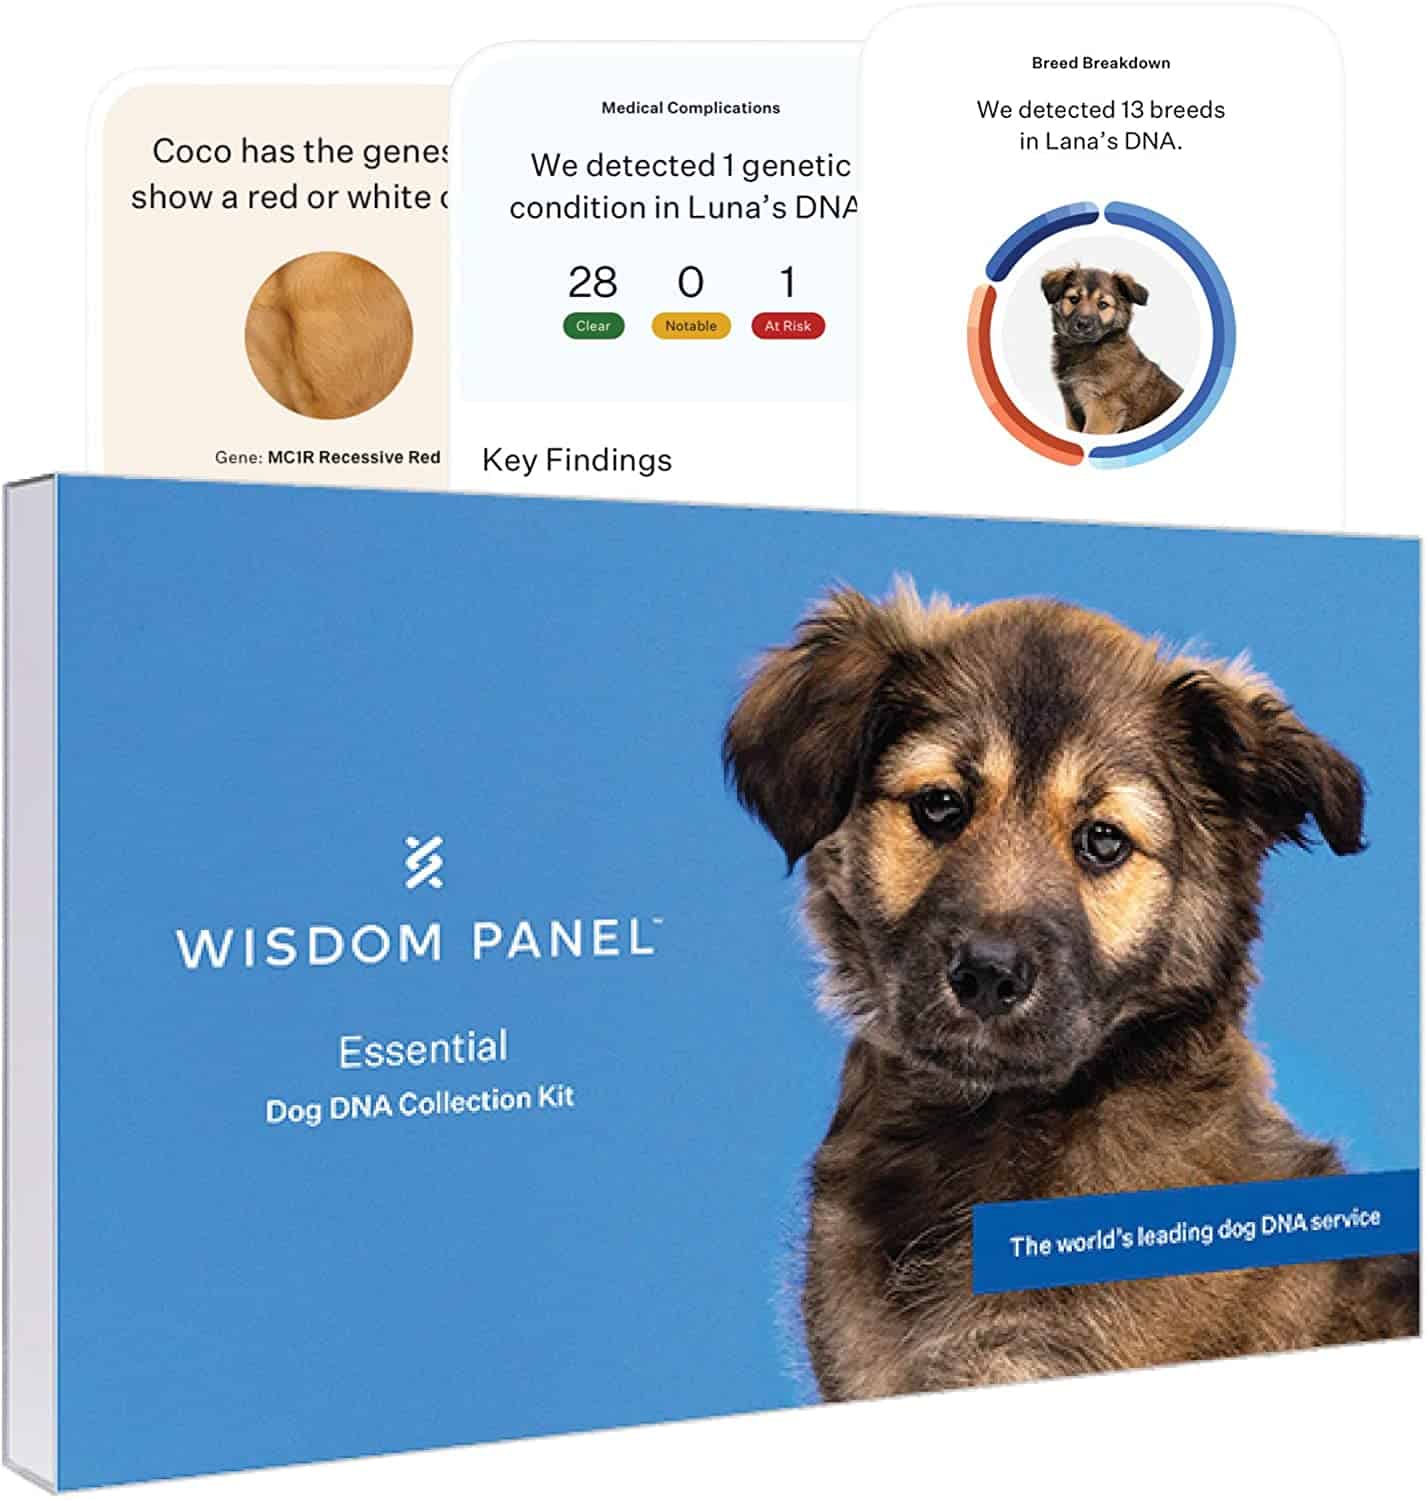 Wisdom Panel Essential: Fundamental Dog DNA Test for Ancestry, Breed and Medical Traits/Conditions